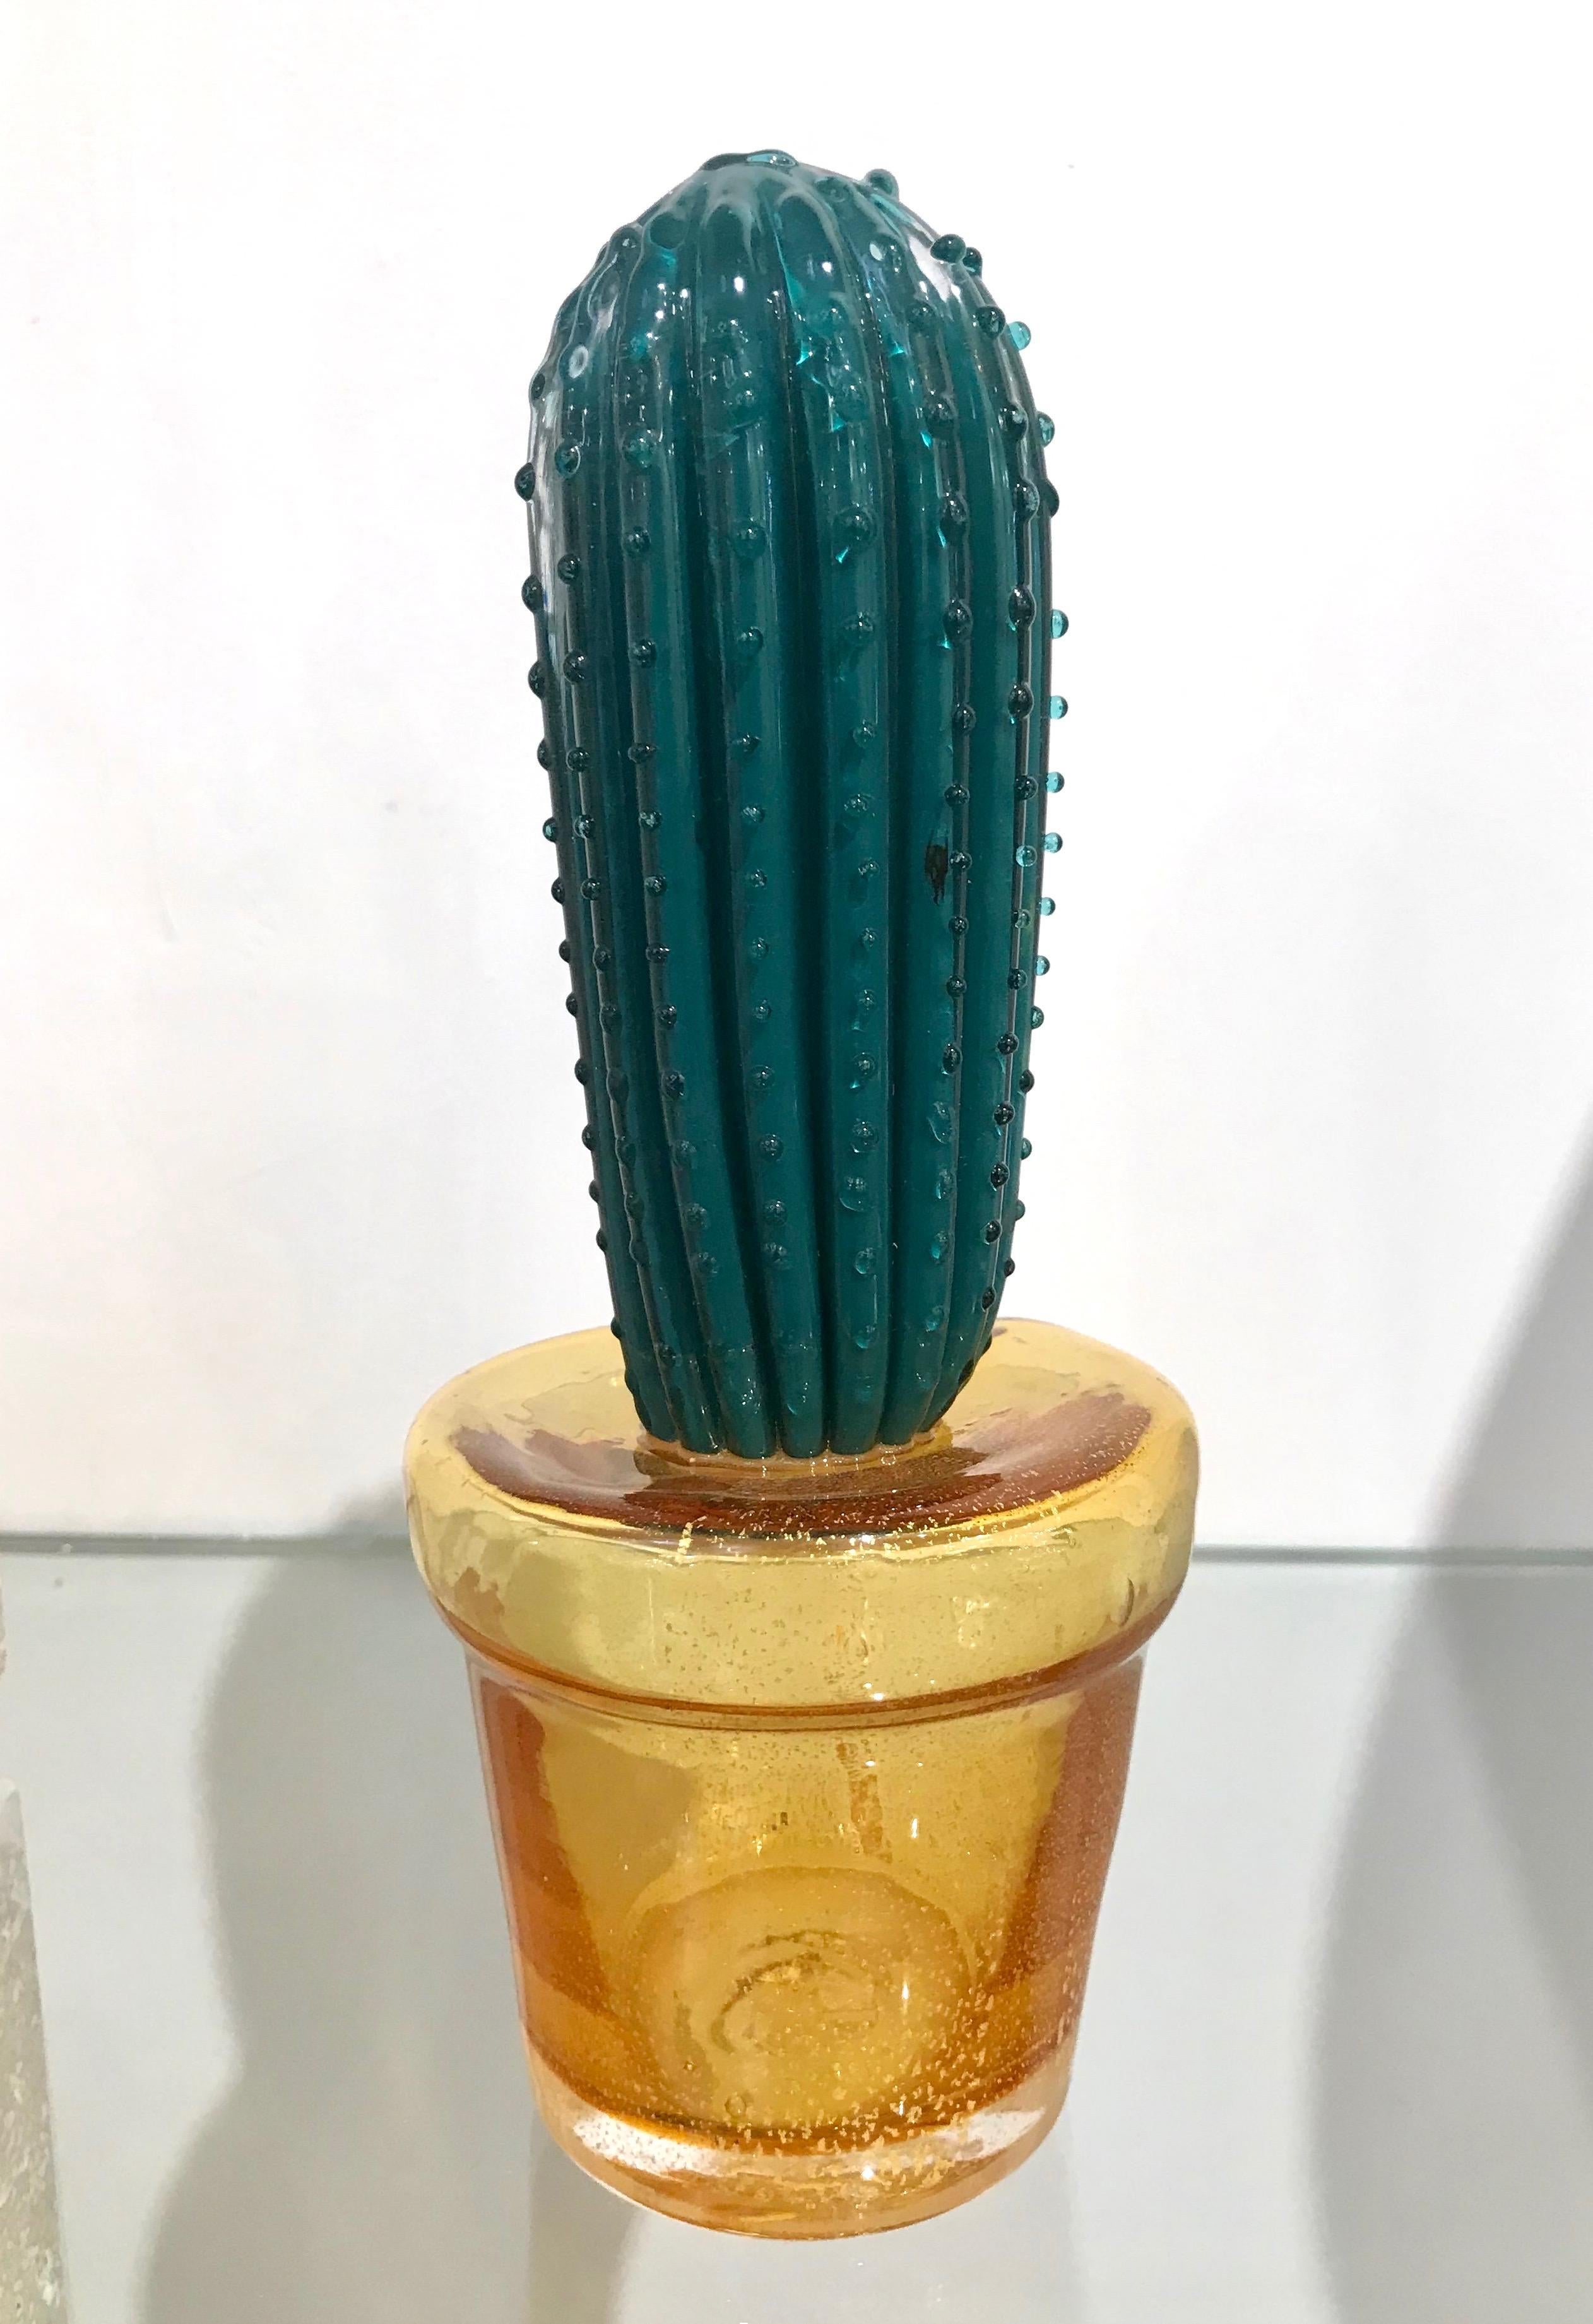 1990s Vintage Italian Teal Green Murano Glass Tall Cactus Plant with Gold Pot 1